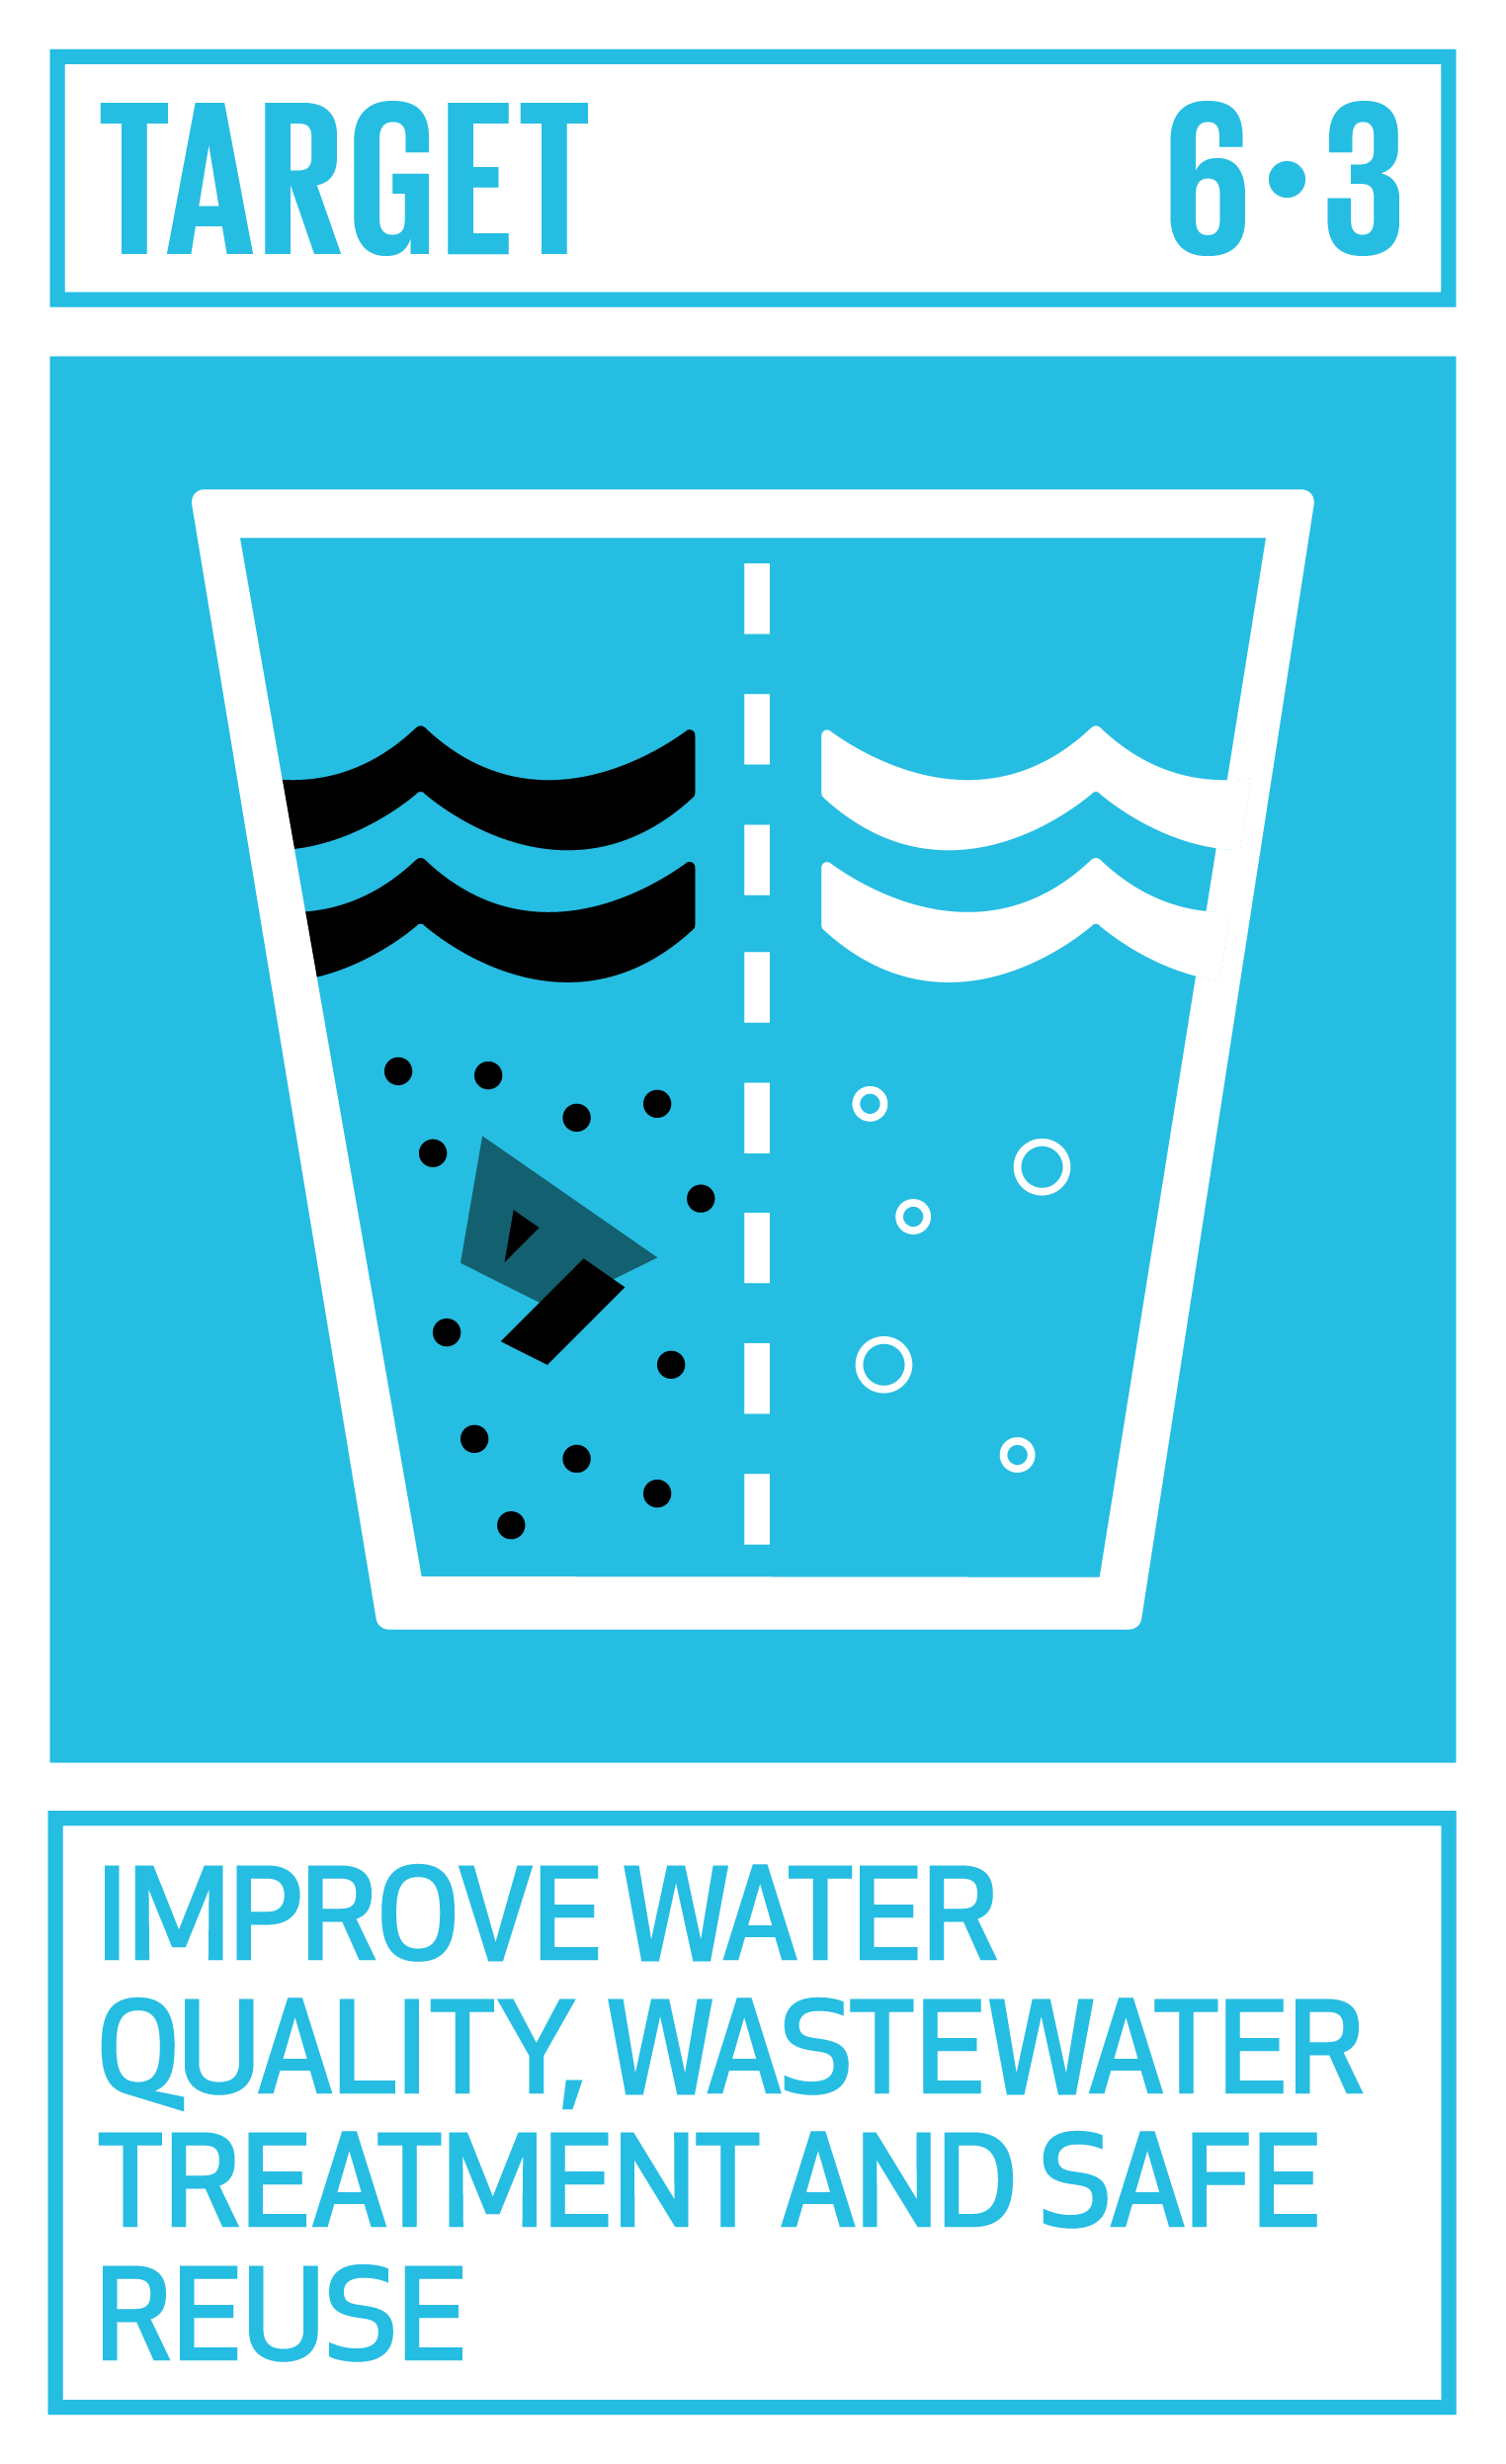 https://ocm.iccrom.org/sdgs/sdg-6-clean-water-and-sanitation/sdg-63-improve-water-quality-wastewater-treatment-and-safe